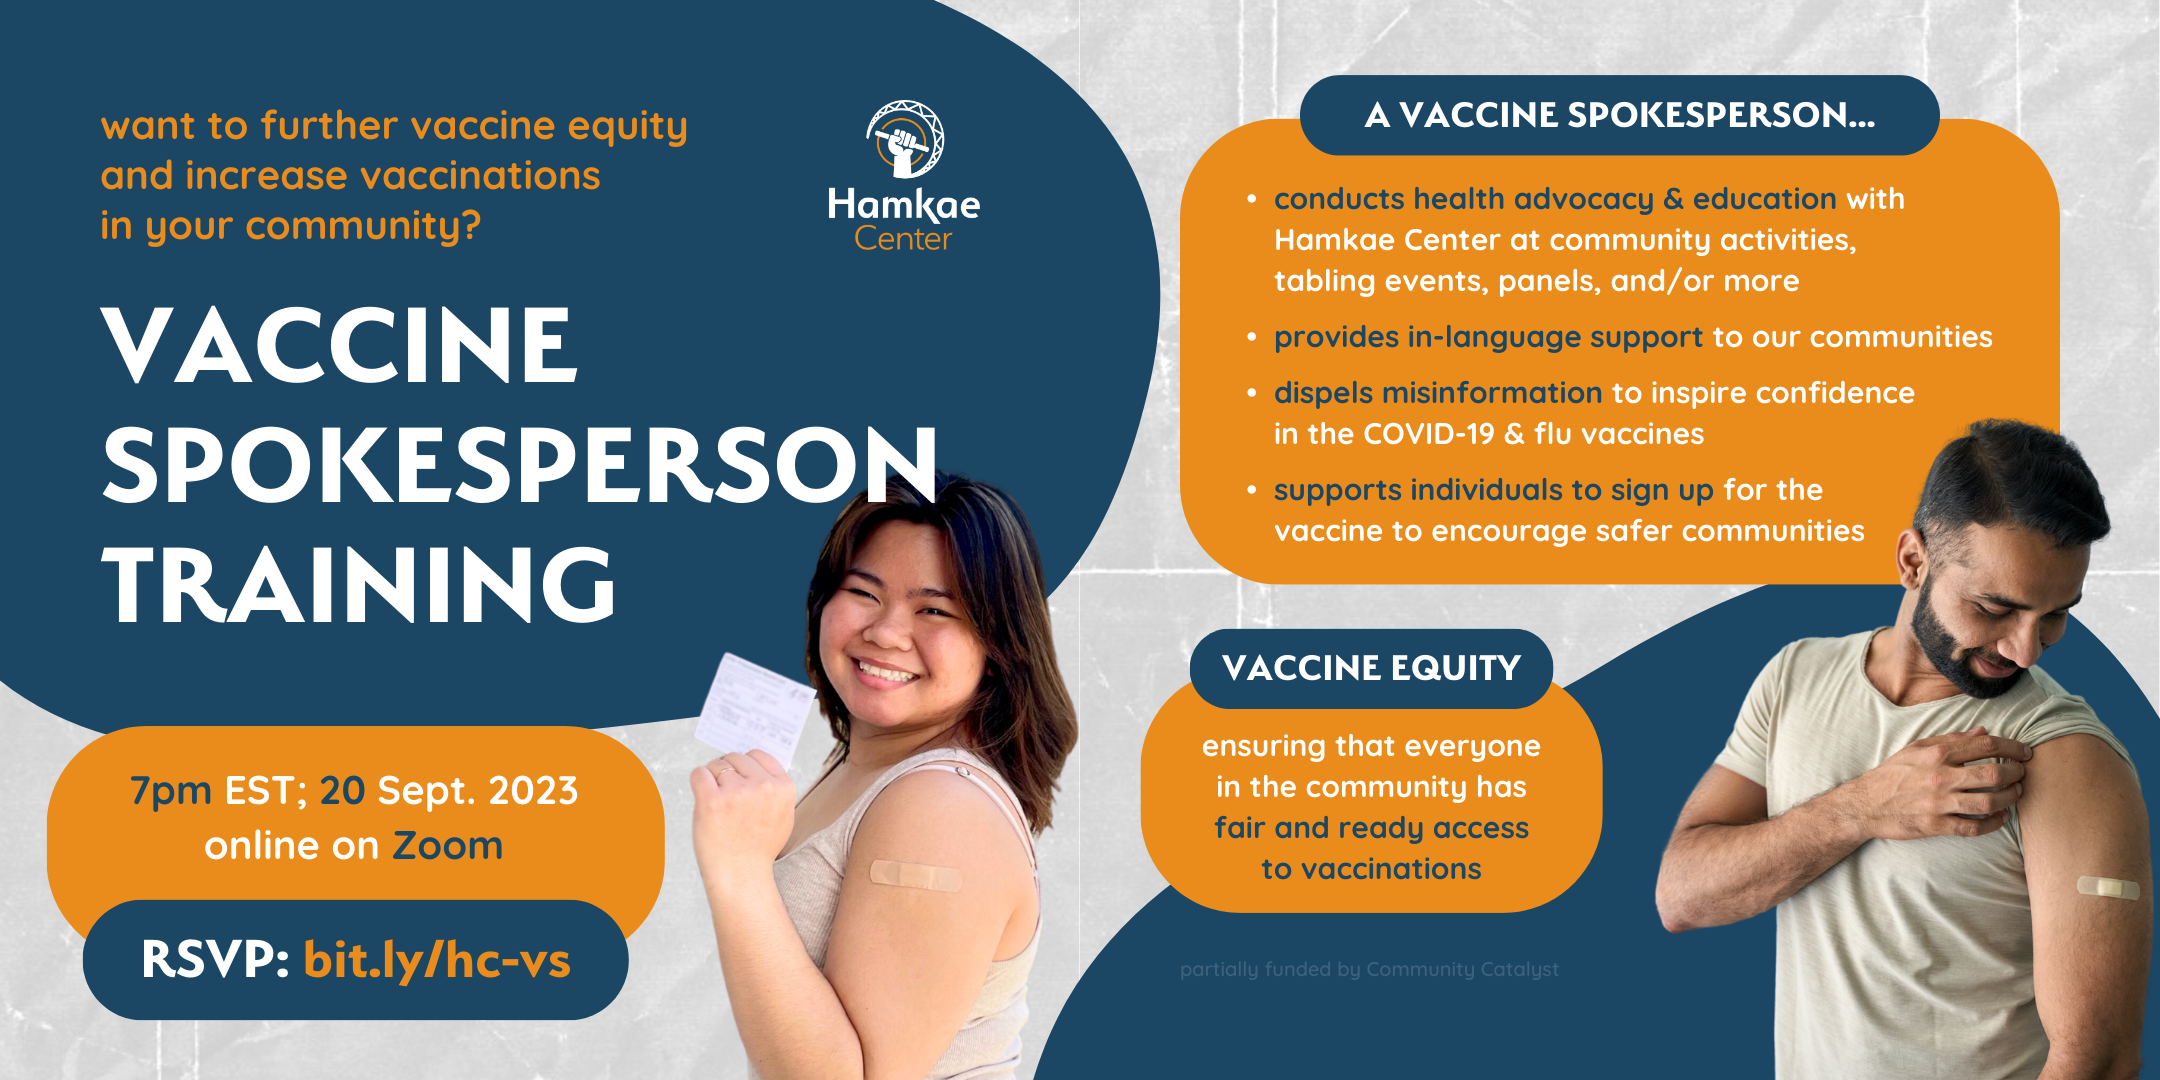 Want to further vaccine equity and increase vaccinations in your community? Hamkae Center's Vaccine Spokesperson Training 7pm EST on 20 September 2023; online on Zoom. RSVP: bit.ly/hc-vs Cutout of a young Vietnamese woman person smiling and holding up her COVID-19 vaccine card. She has a bandage plastered on her upper left arm. A vaccine spokesperson... - Conducts health advocacy & education with Hamkae Center at community activities, tabling events, panels, and/or more - Provides in-language support to our communities - Dispels misinformation to inspire confidence in the COVID-19 & flu vaccines - Supports individuals to sign up for the vaccine to encourage safer communities Vaccine Equity: Ensuring that everyone in the community has fair and ready access to vaccinations Partially funded by Community Catalyst. Cutout of an Indian man smiling and holding up his t-shirt sleeve to look at the bandage plastered on his upper left arm.